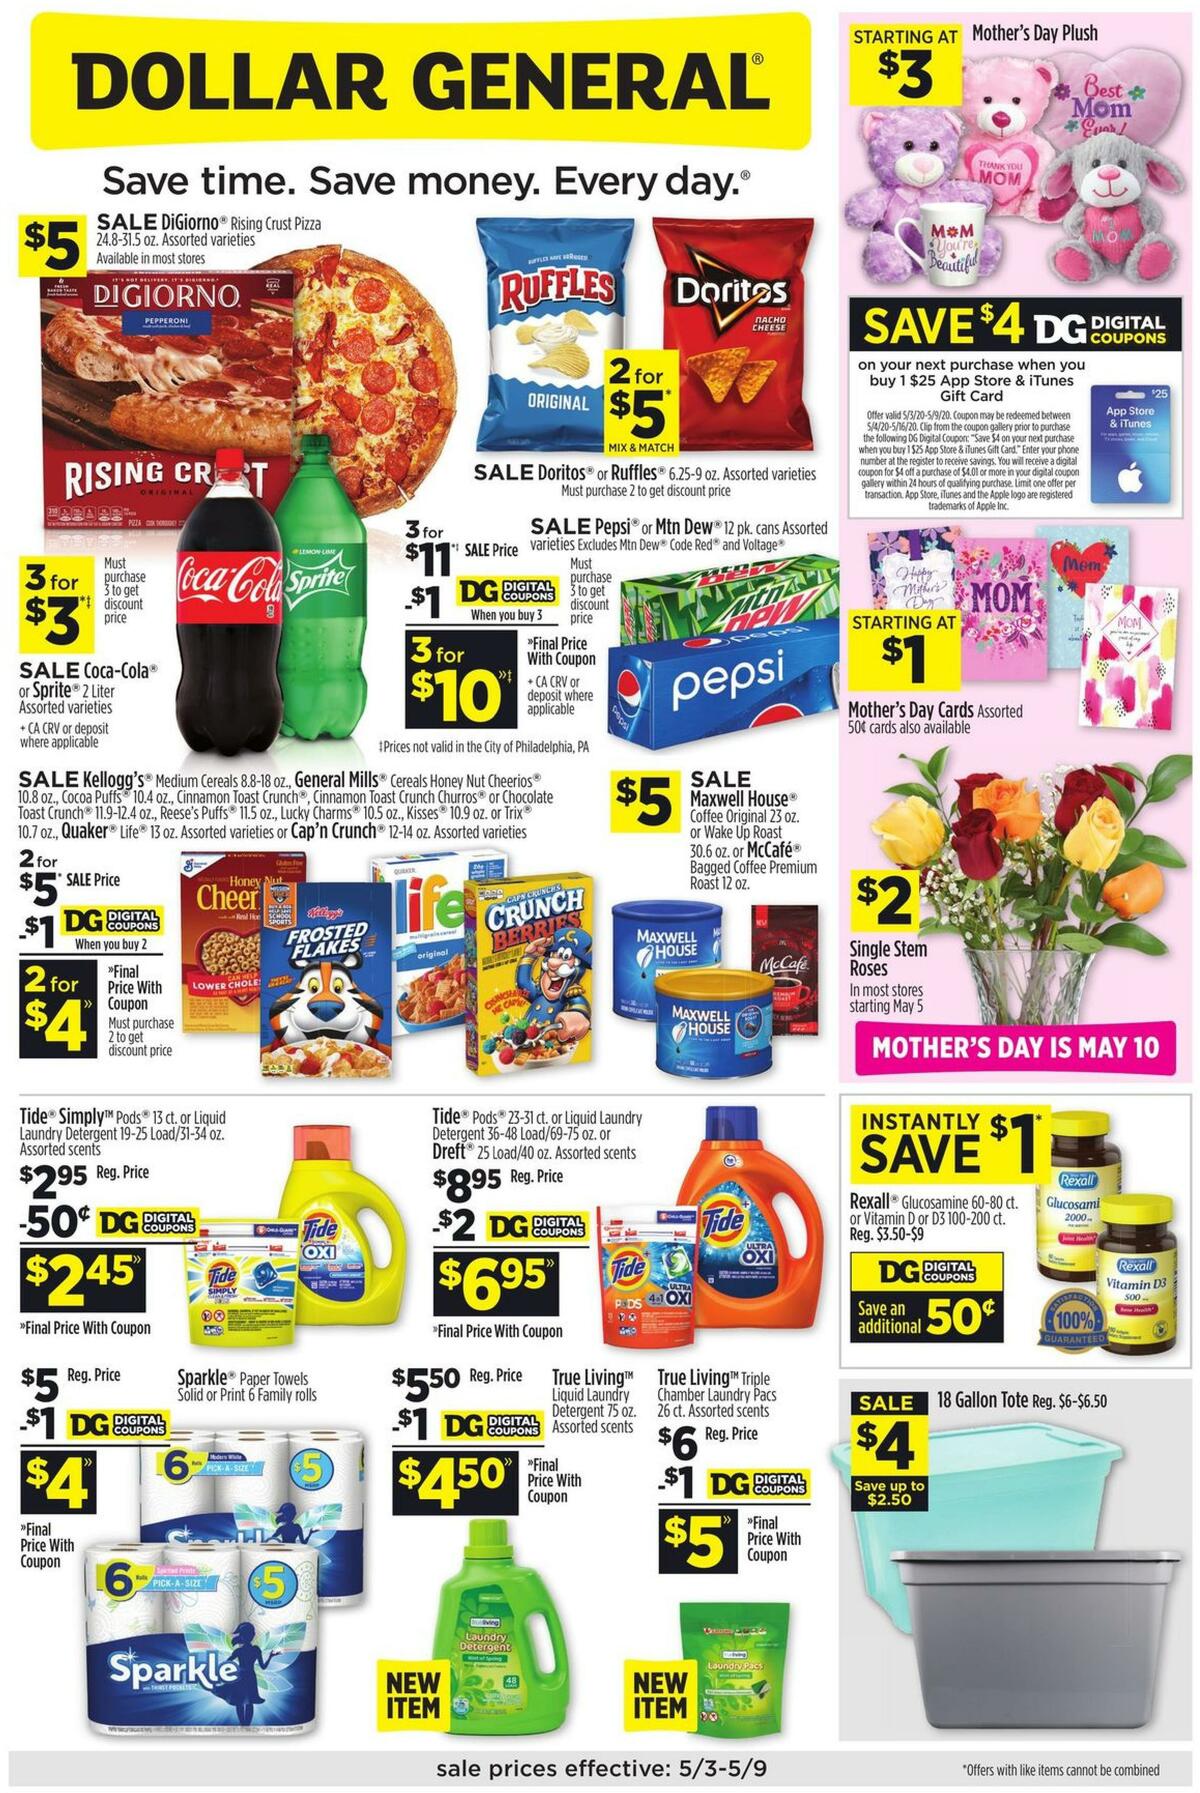 Dollar General Weekly Ad from May 3